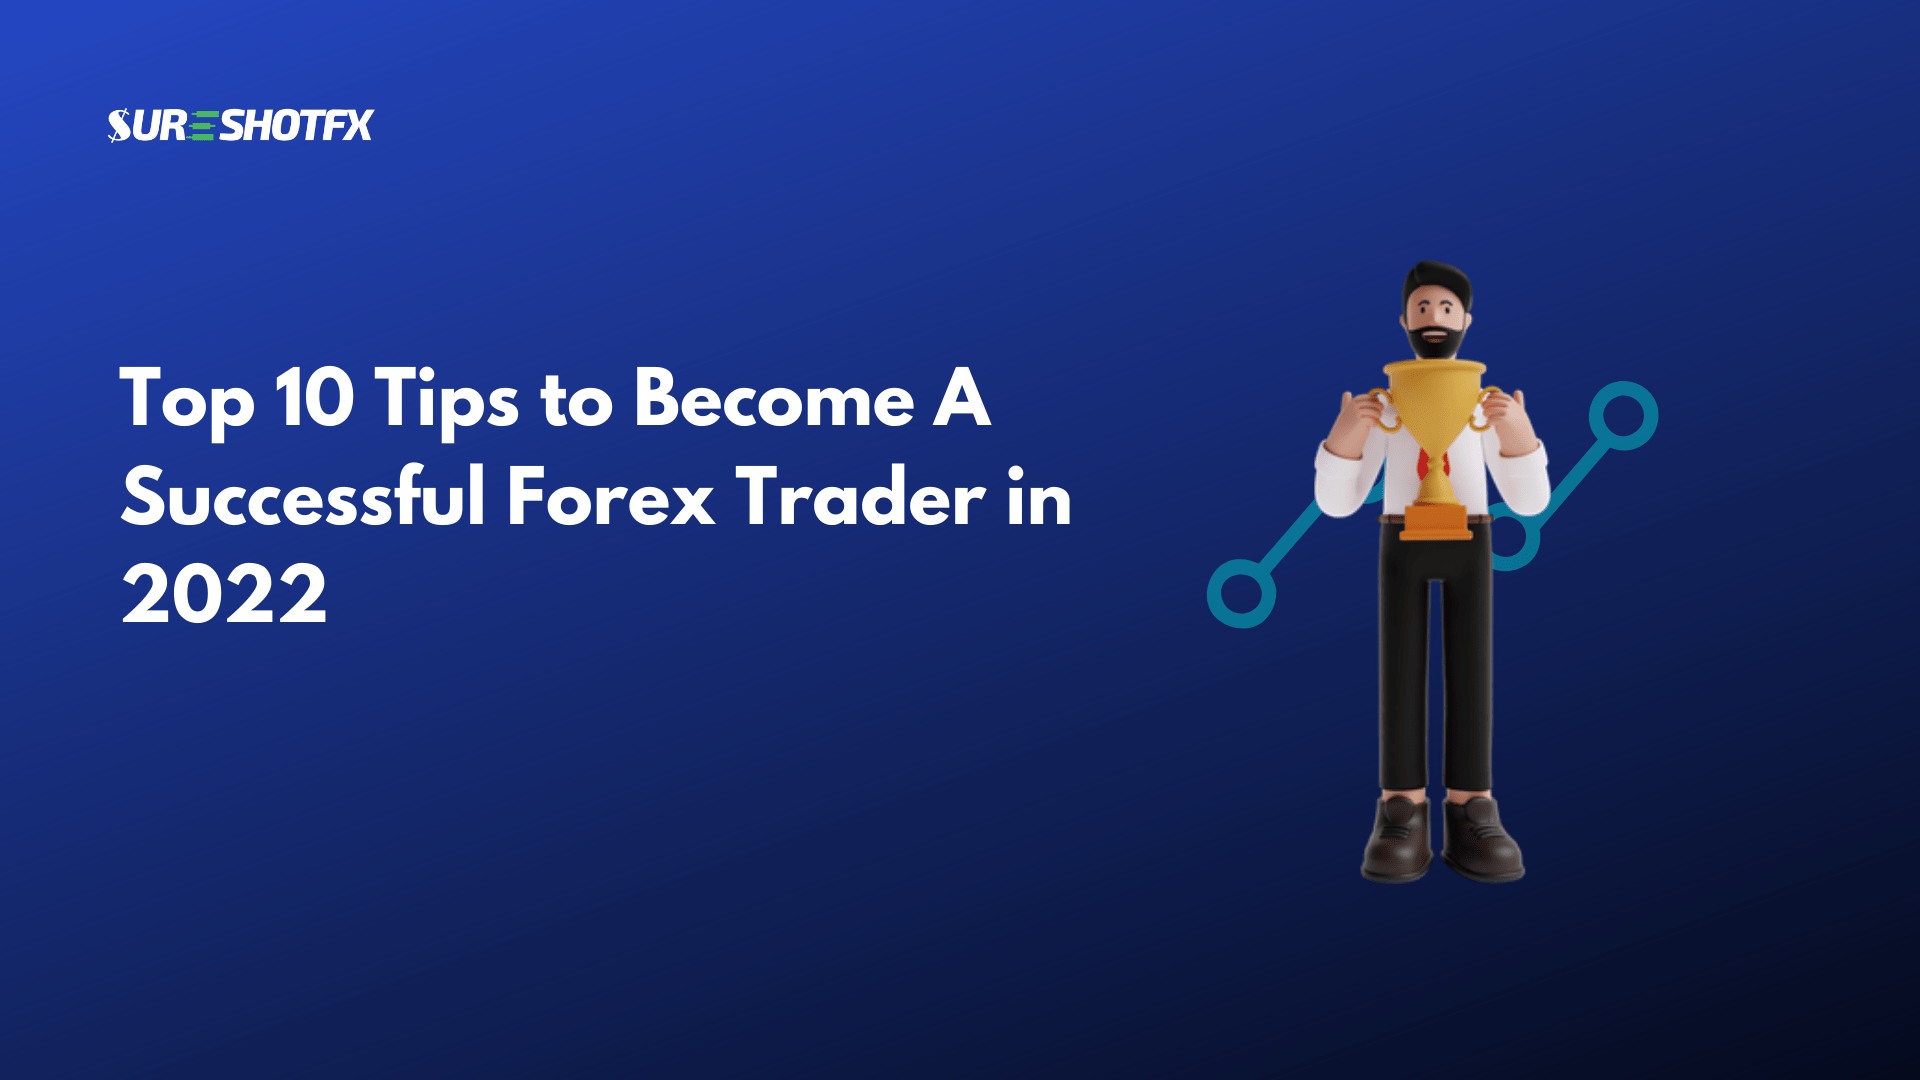 Top 10 Tips to Become A Successful Forex Trader in 2022 – SureShotFX